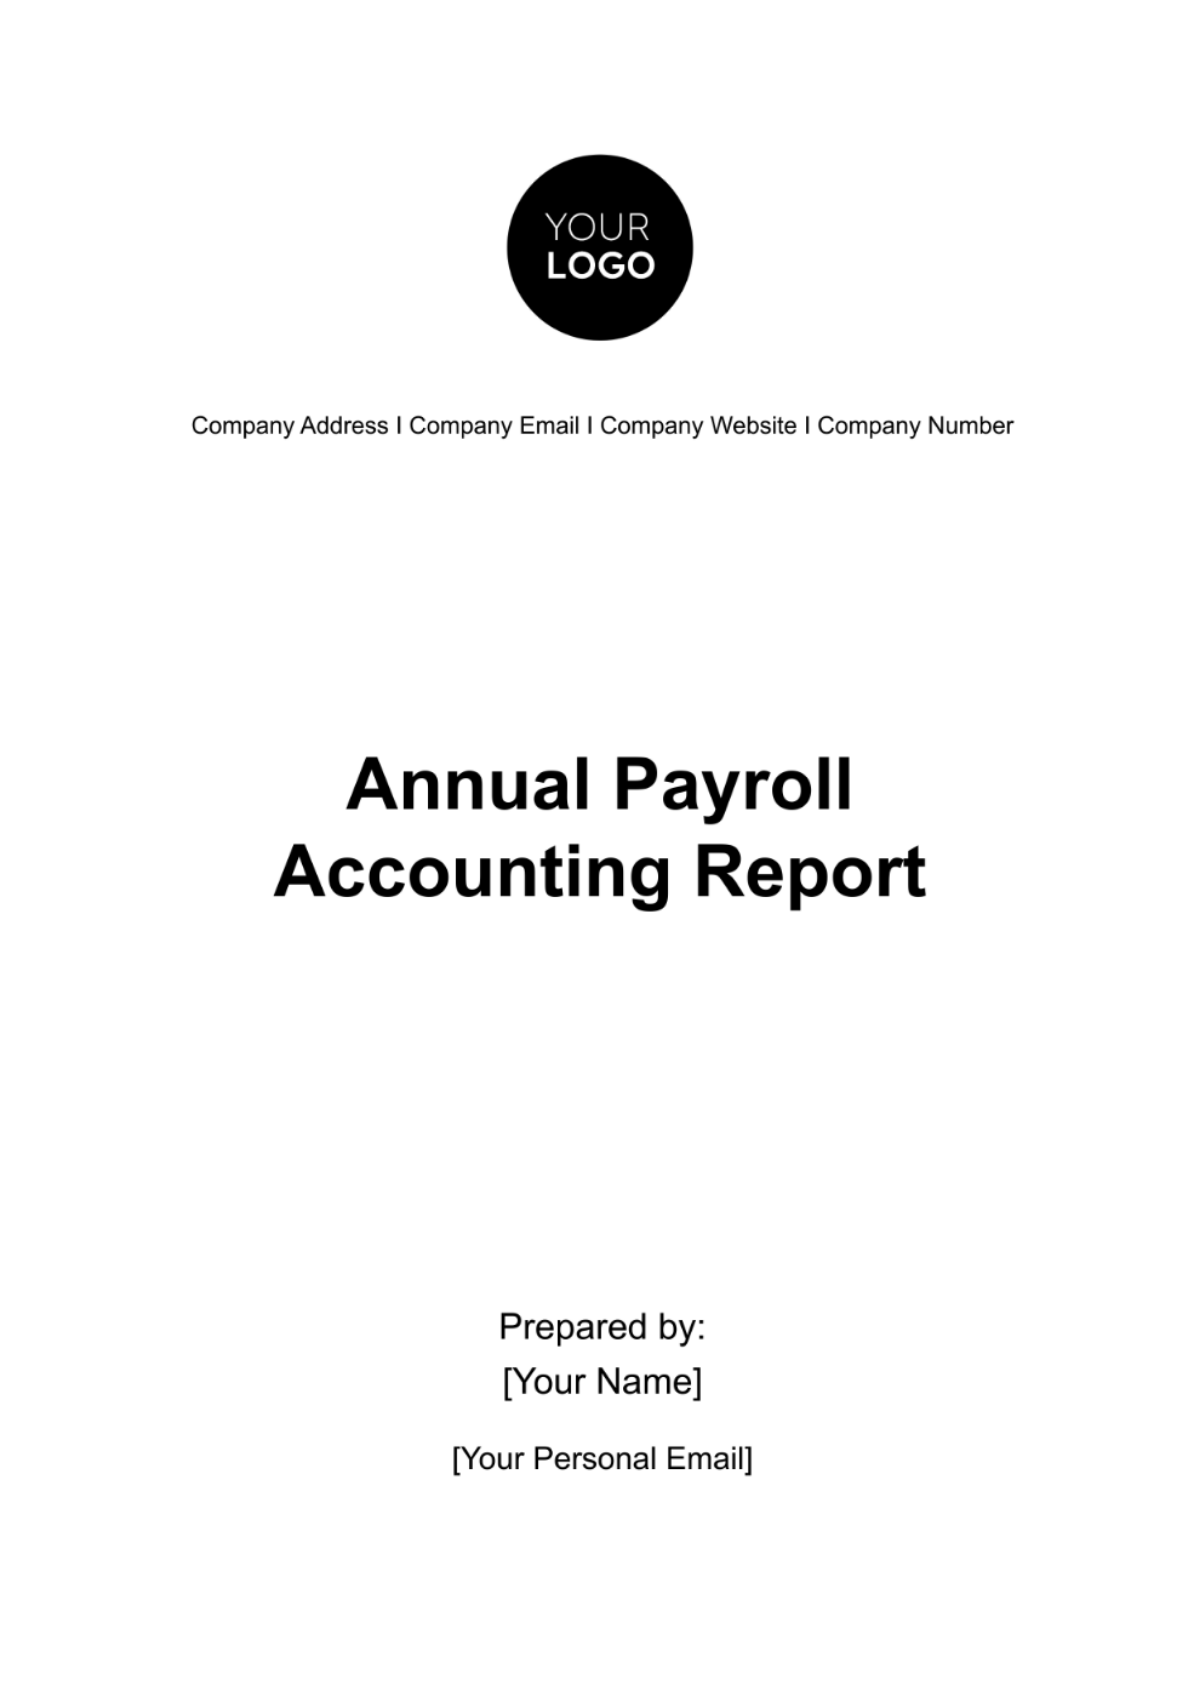 Annual Payroll Accounting Report Template